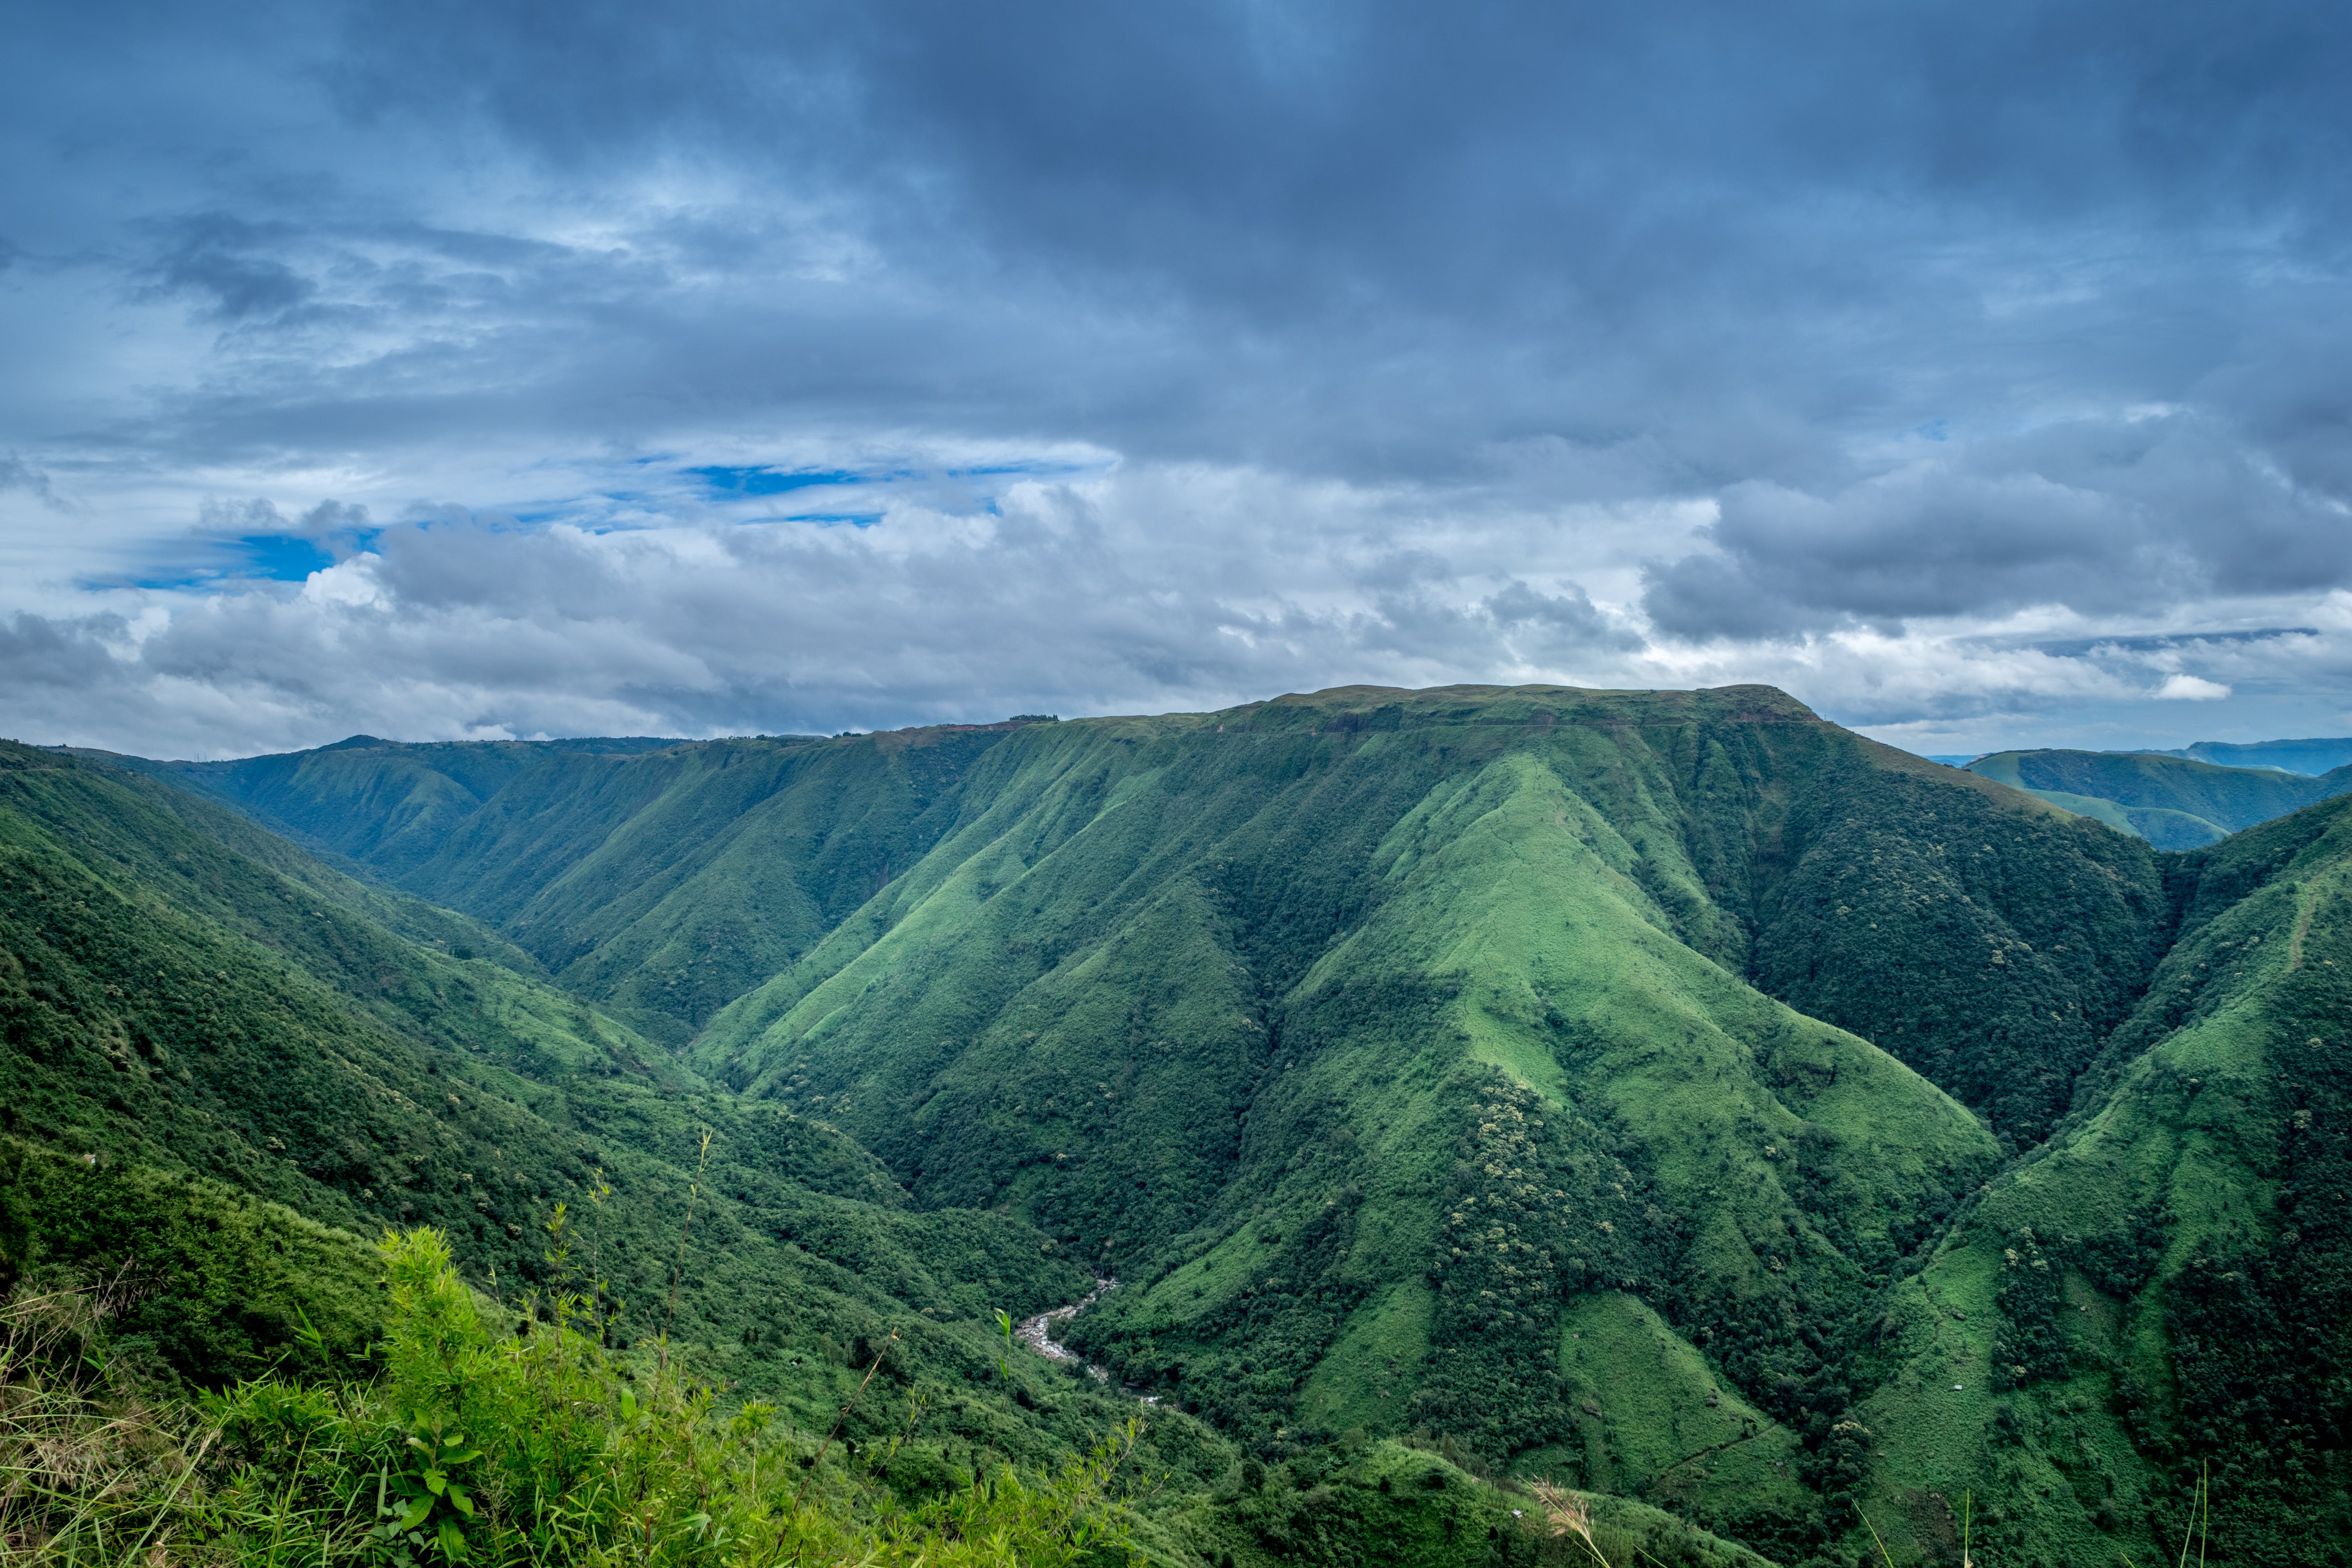 Landscape Photography Of Green Mountains Under Cloudy Sky